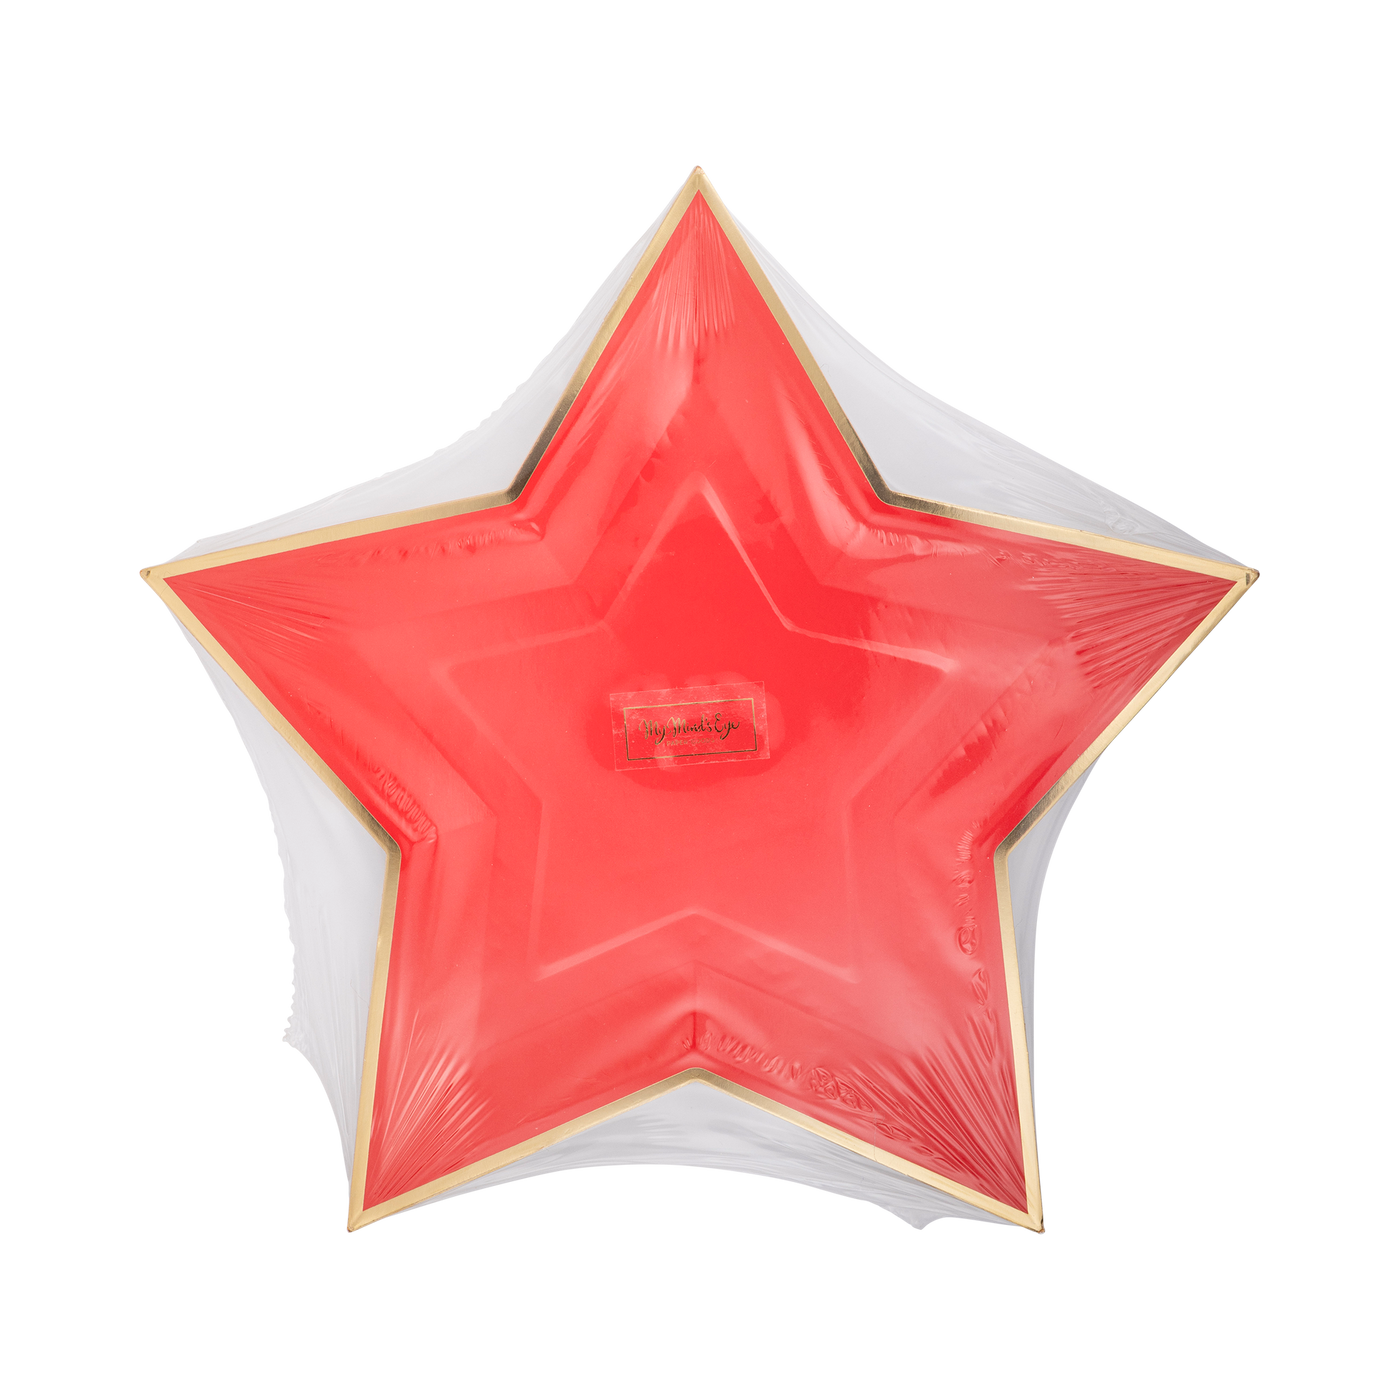 Red Star Shaped Gold Foiled Paper Plate